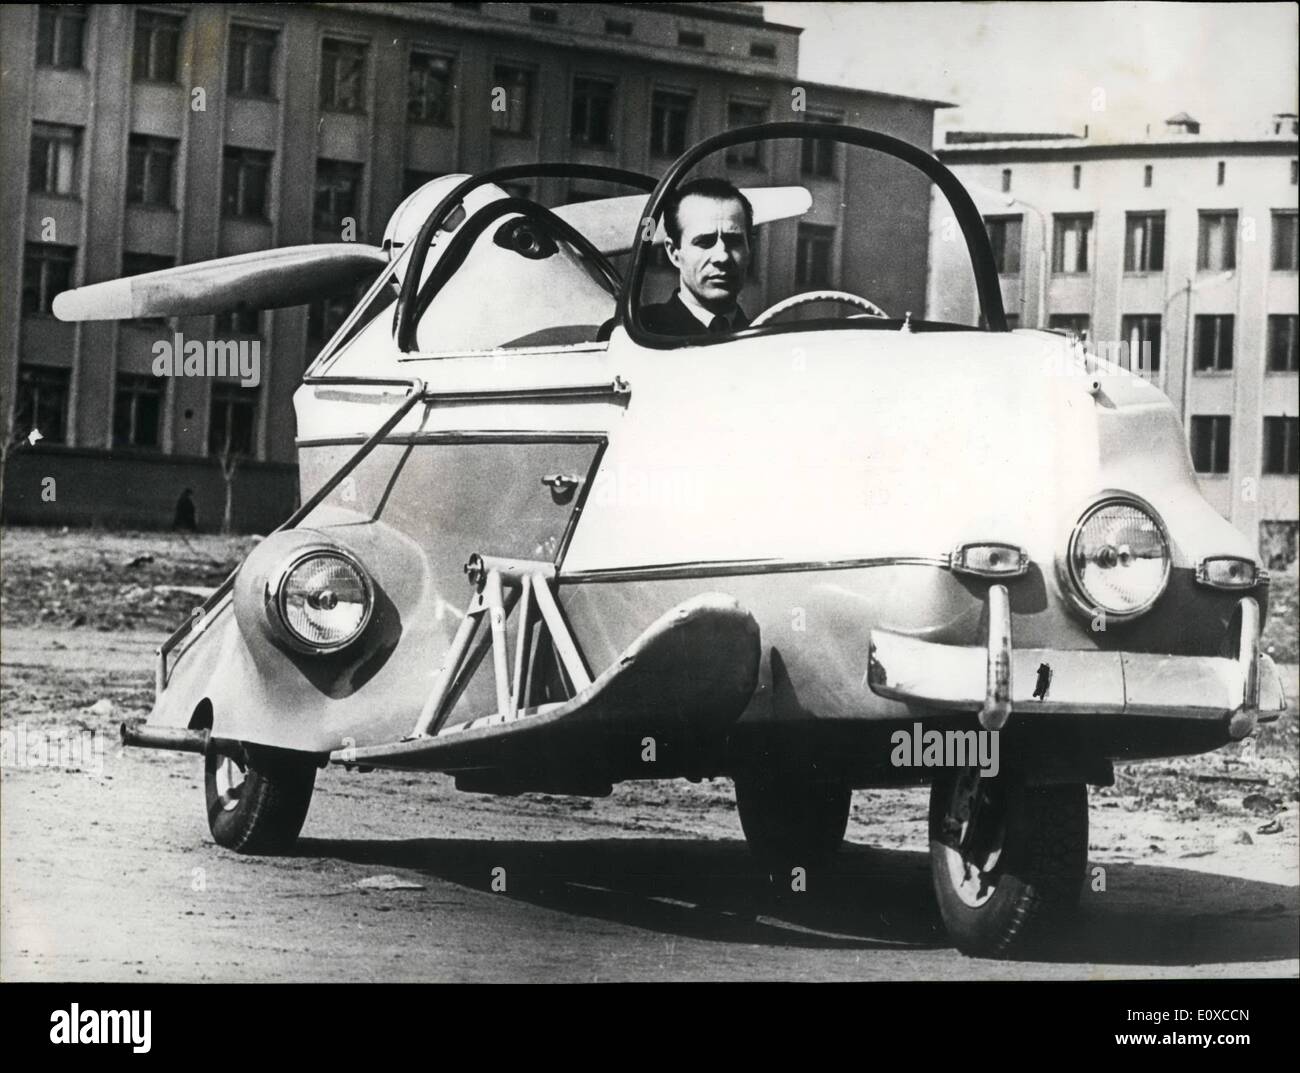 Apr. 04, 1966 - Introducing Autoaeromobile: The vehicle on the picture has a long name: Autoaero-mobile. It is capable of developing a speed of 120 kms. P.H. on dry land, 80 km. on snow and 50km. on after. The vehicle was developed by soviet mechanic V. Krunkov who, is now working on a new air-cushion model. Photo Shows Kurunkov at the whell of his autoaeromobile. Stock Photo